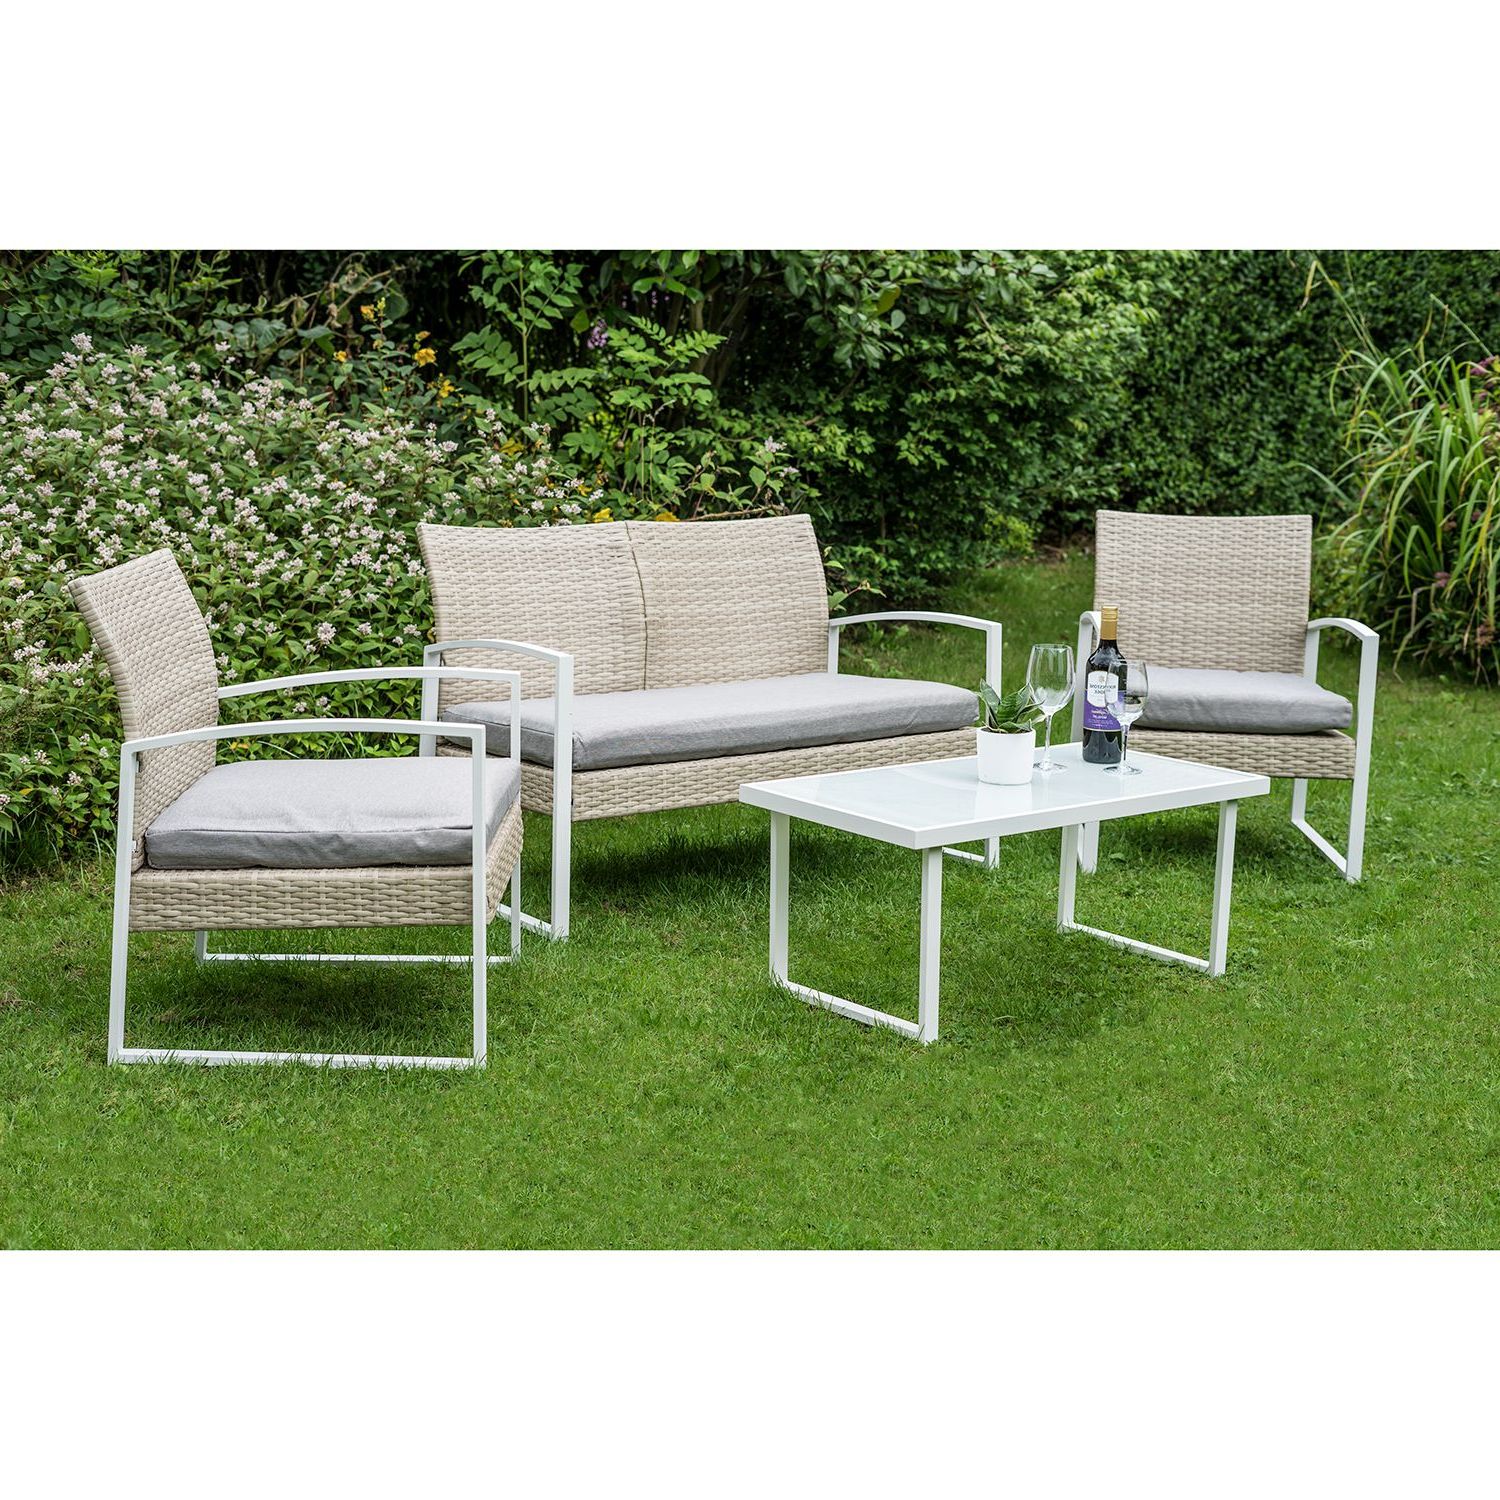 Most Up To Date 4 Piece Gray Outdoor Patio Seating Sets Inside 4 Piece Rattan Patio Outdoor Furniture Set With Grey Cushions & Table (View 12 of 15)